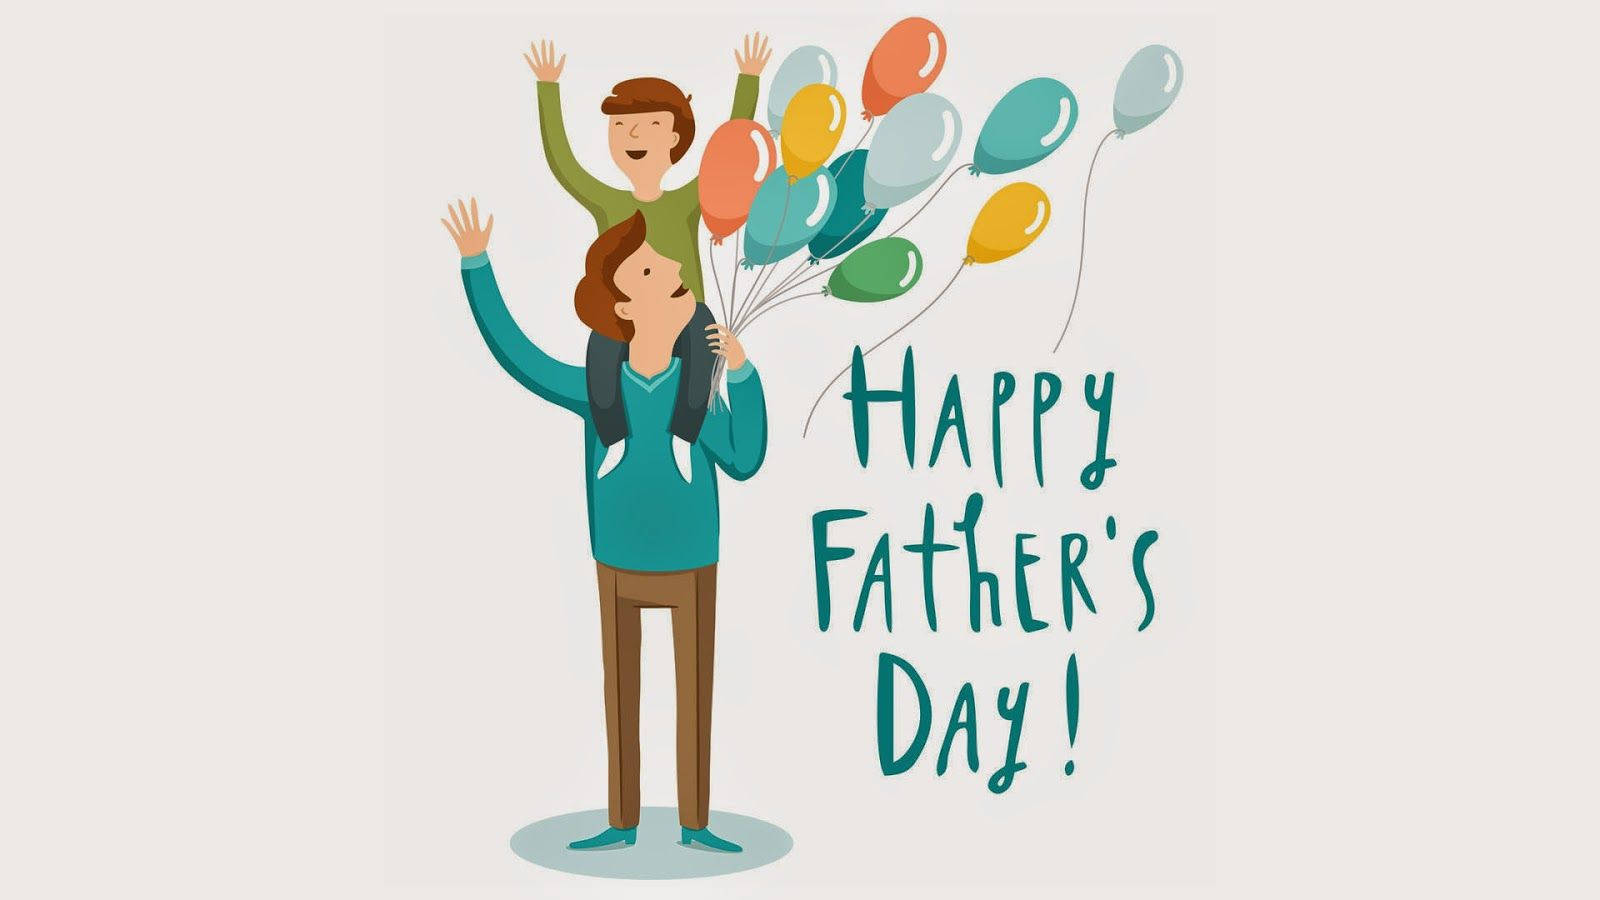 Cute Animated Father's Day Poster Wallpaper